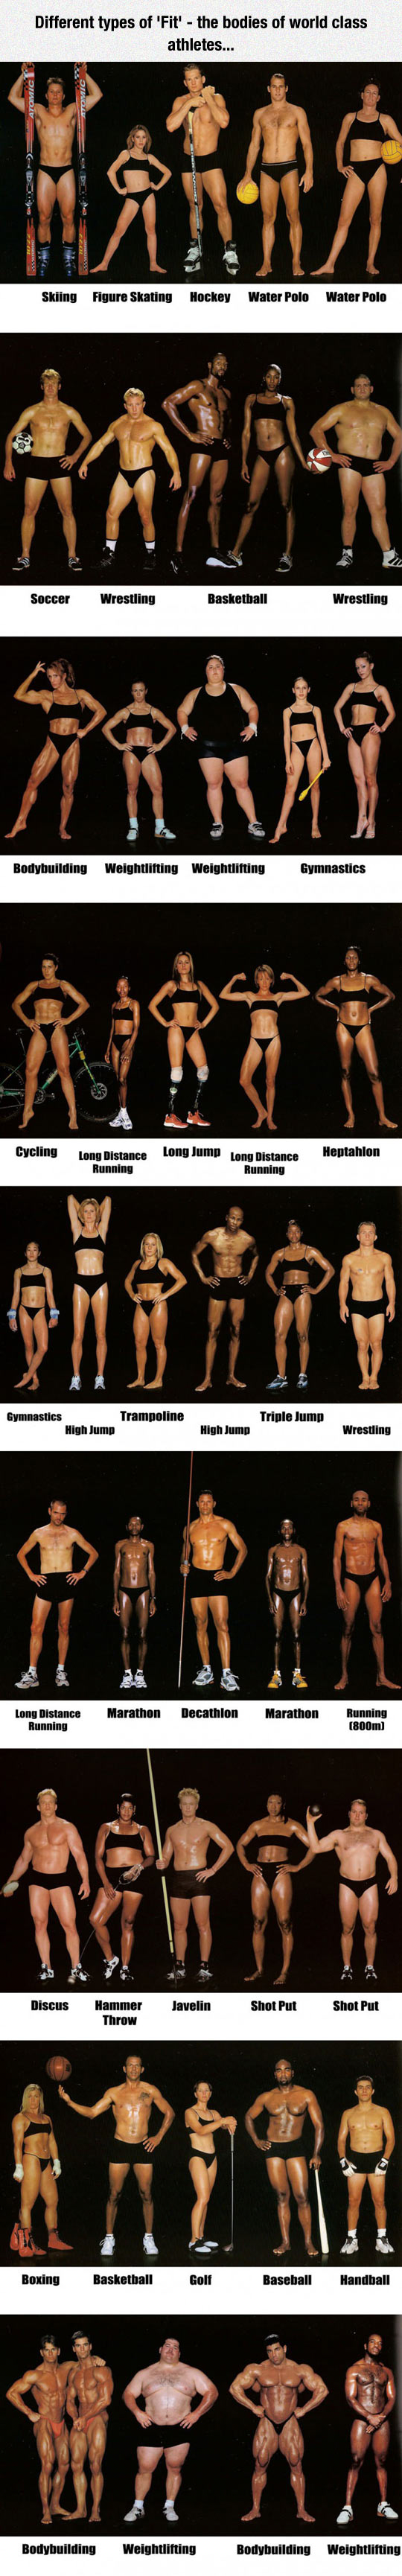 Different types of "Fit" - bodies of world class athletes